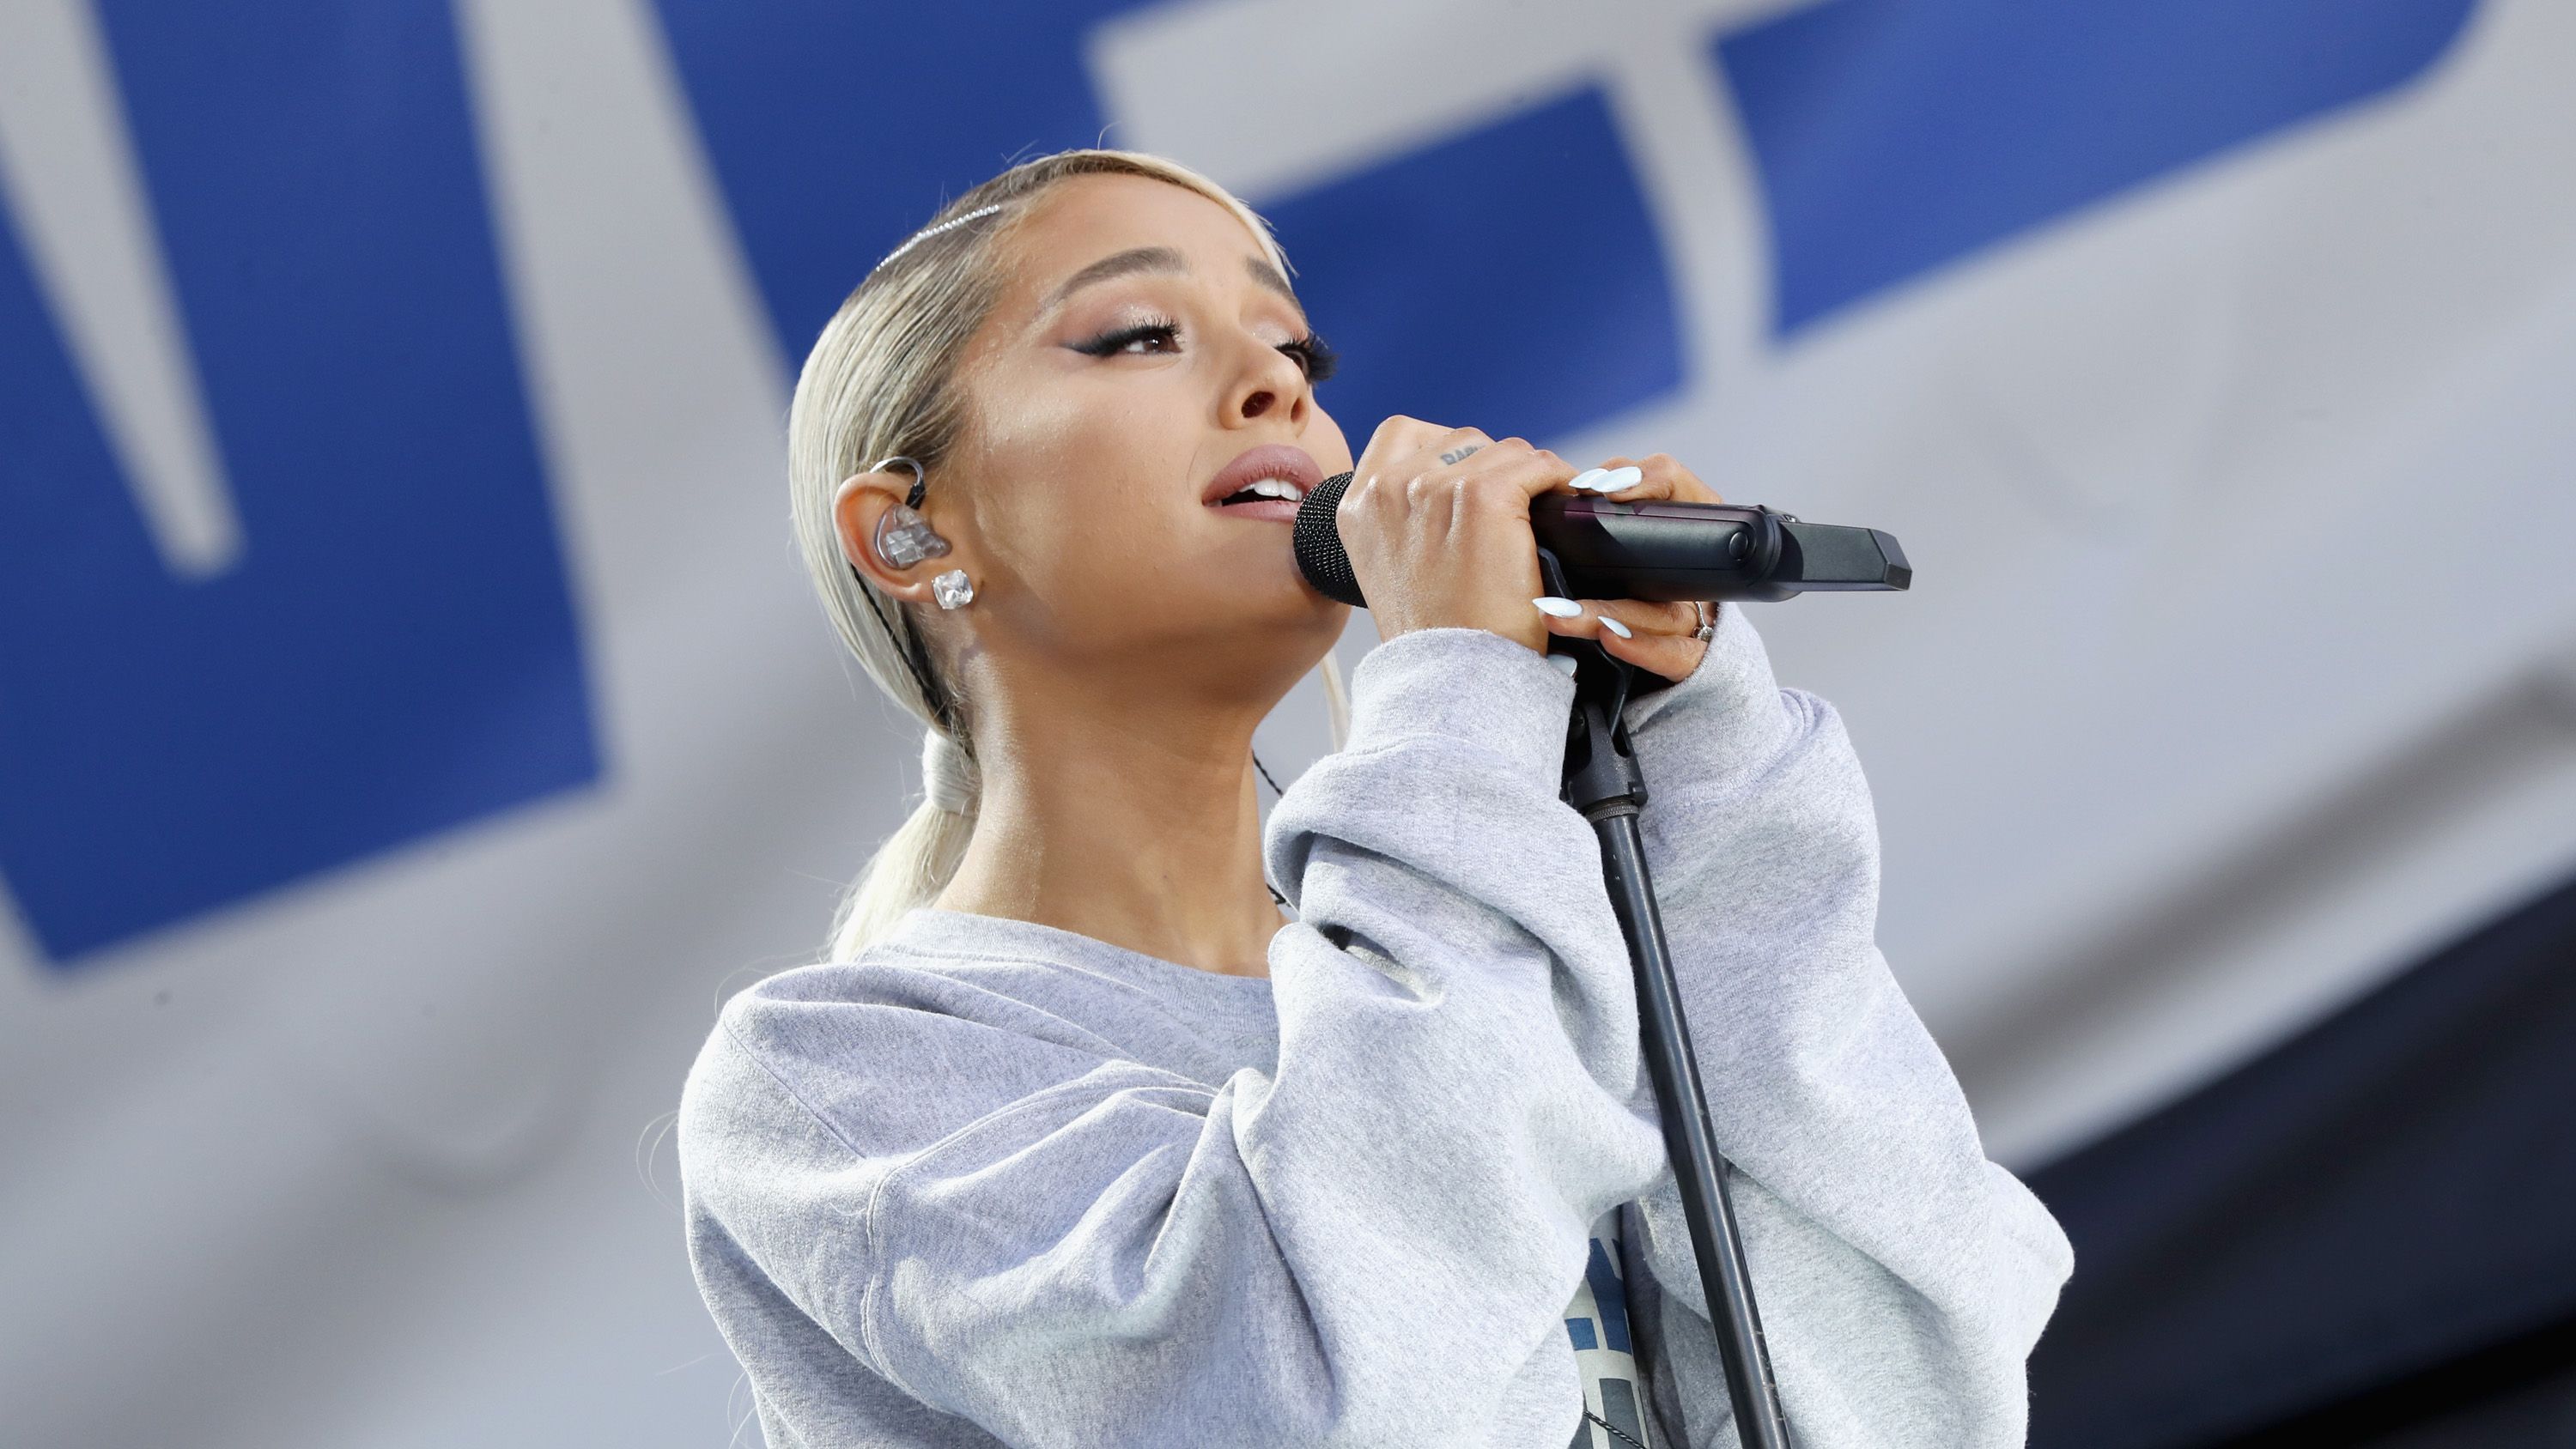 Ariana Grande Canceled 'SNL' Appearance for "Emotional Reasons" Why